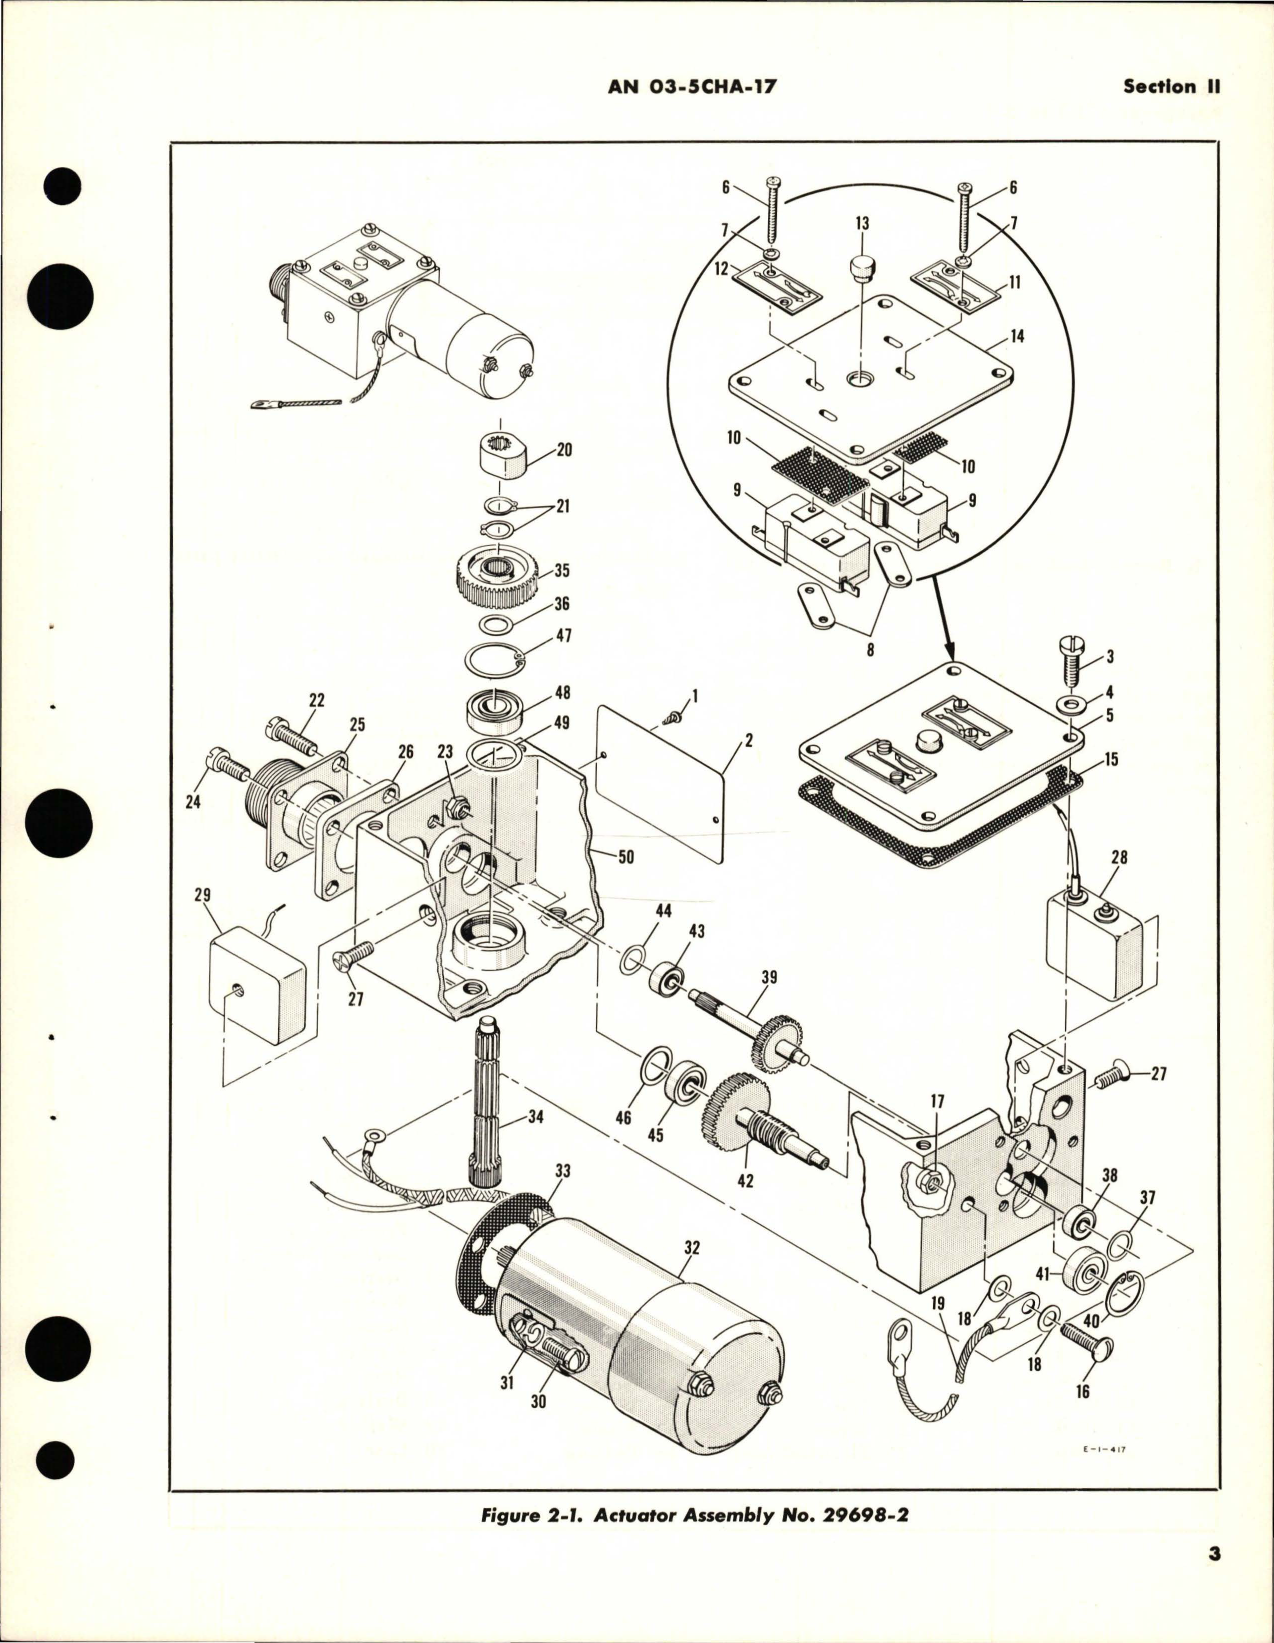 Sample page 7 from AirCorps Library document: Overhaul Instructions for Electro-Mechanical Torque Actuators 